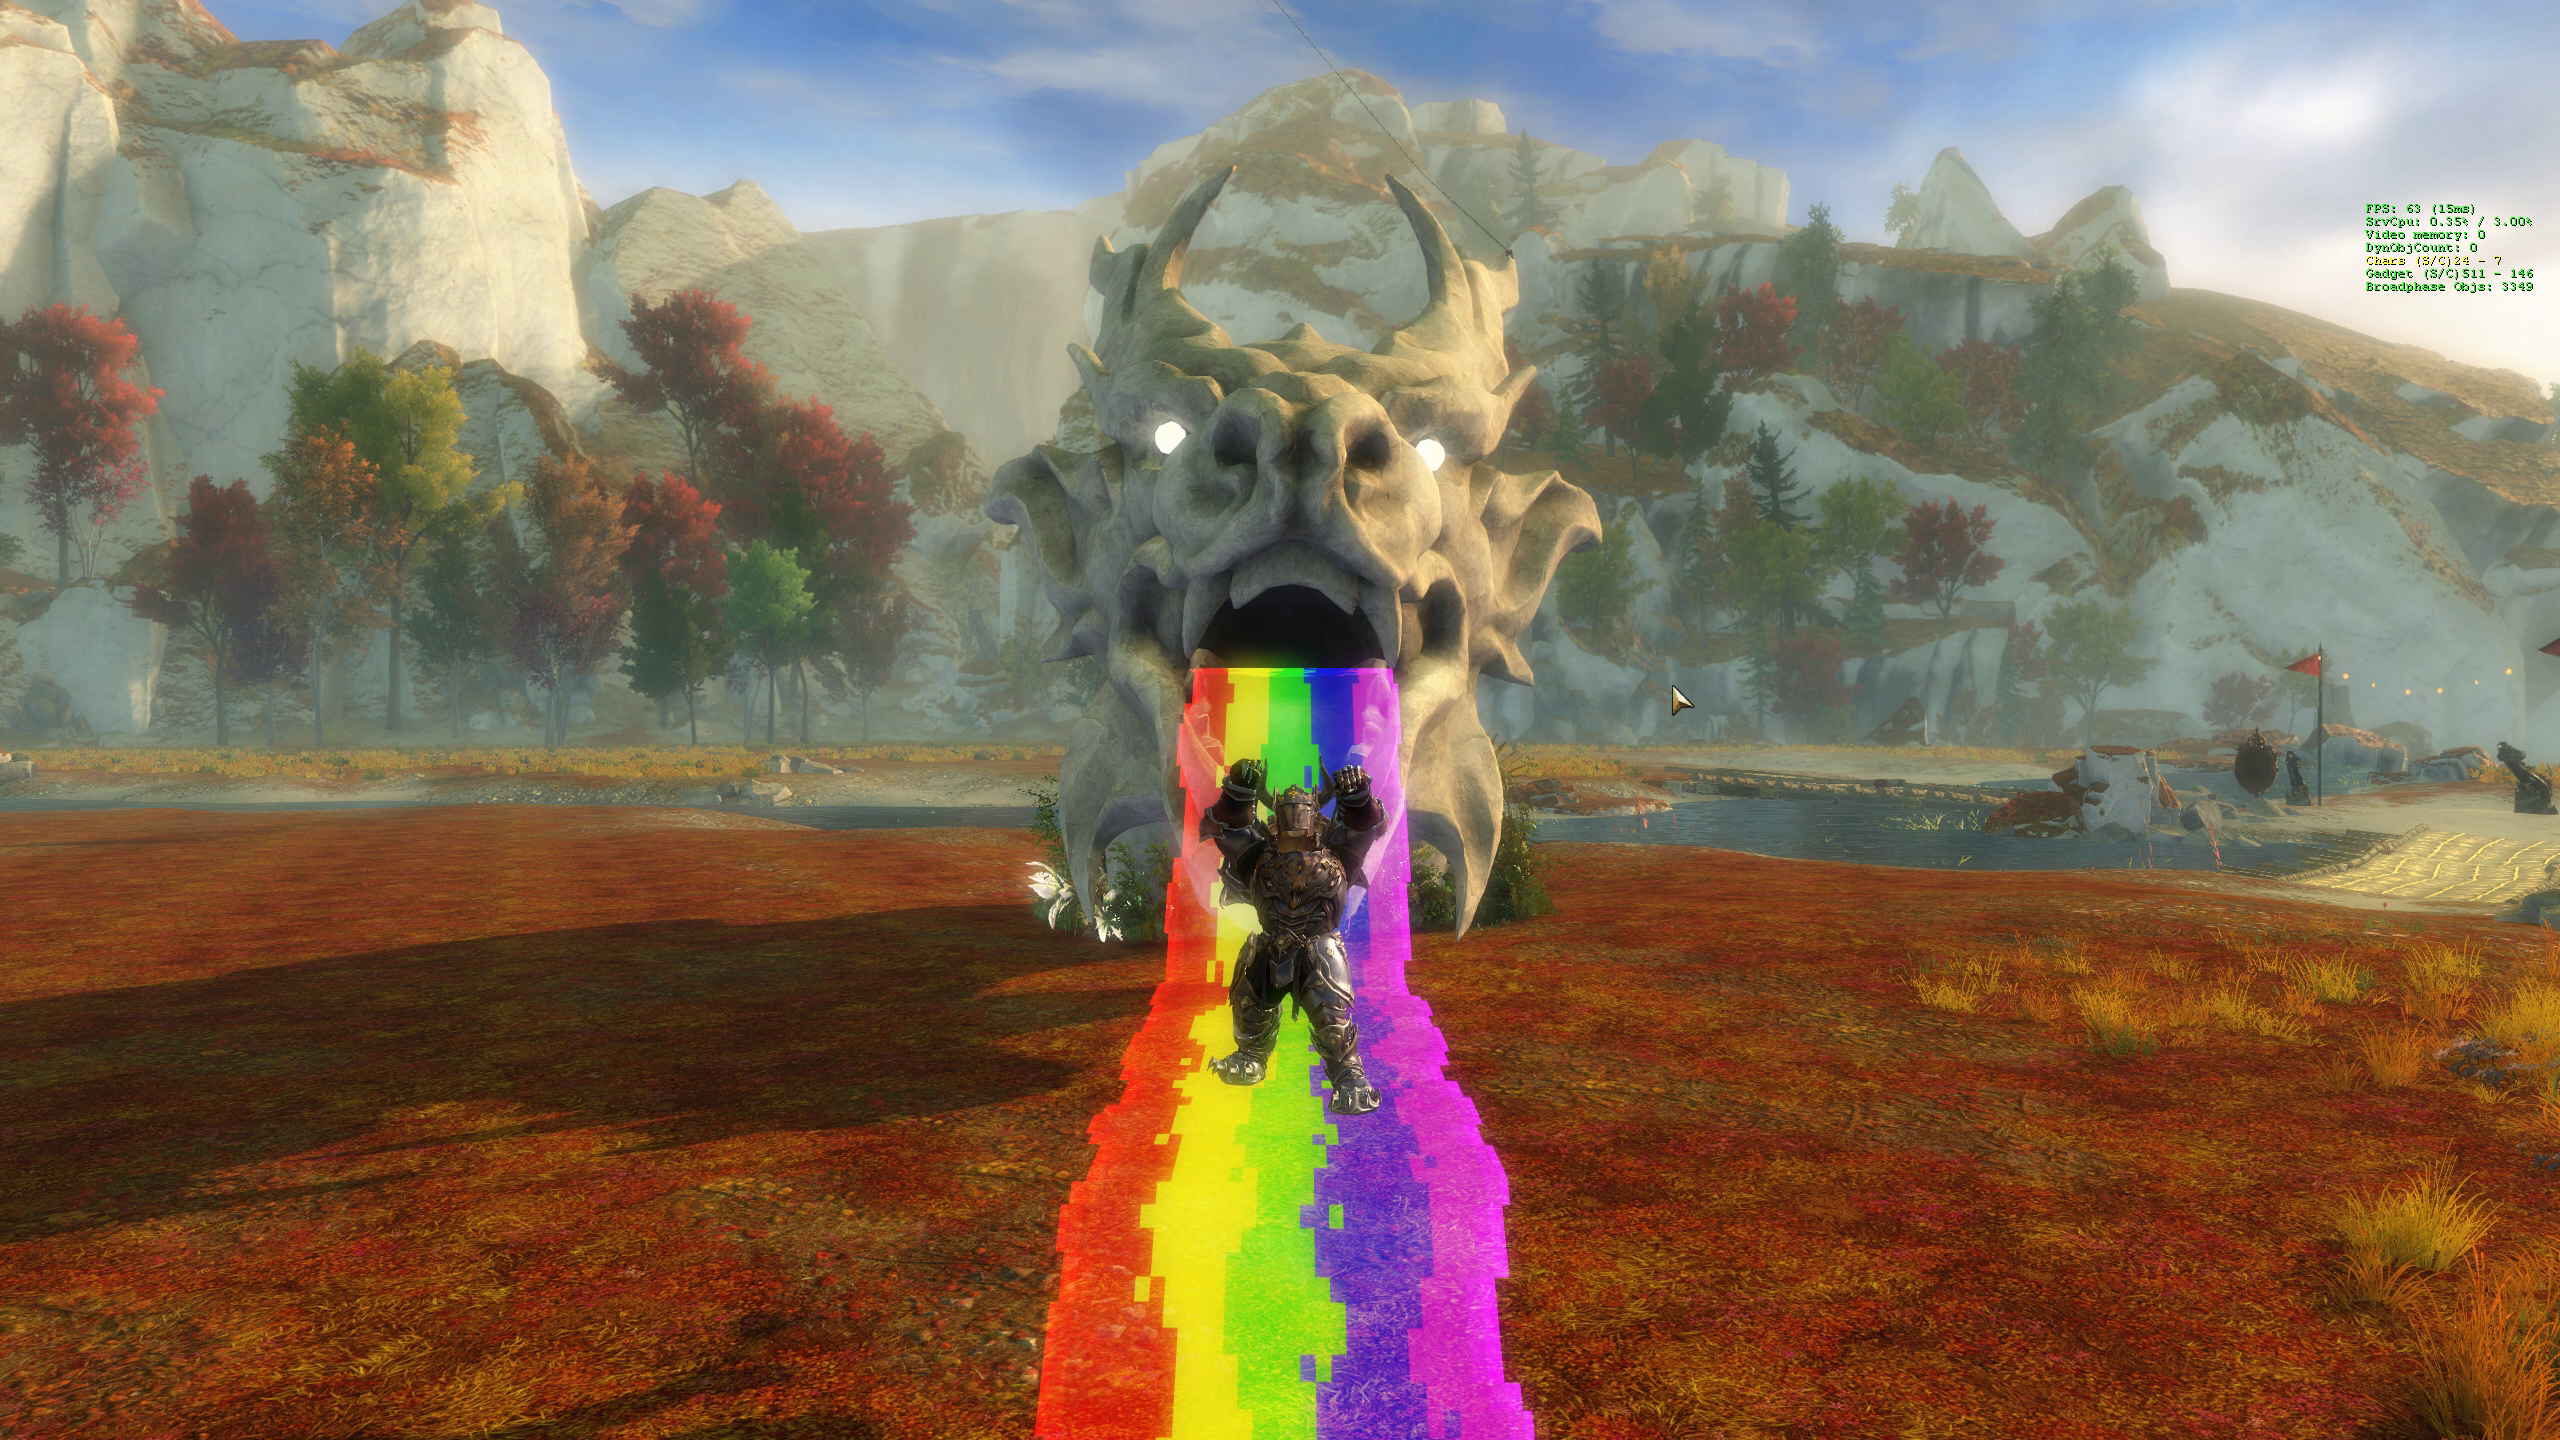 A dragon statue with a rainbow bridge coming out of its mouth